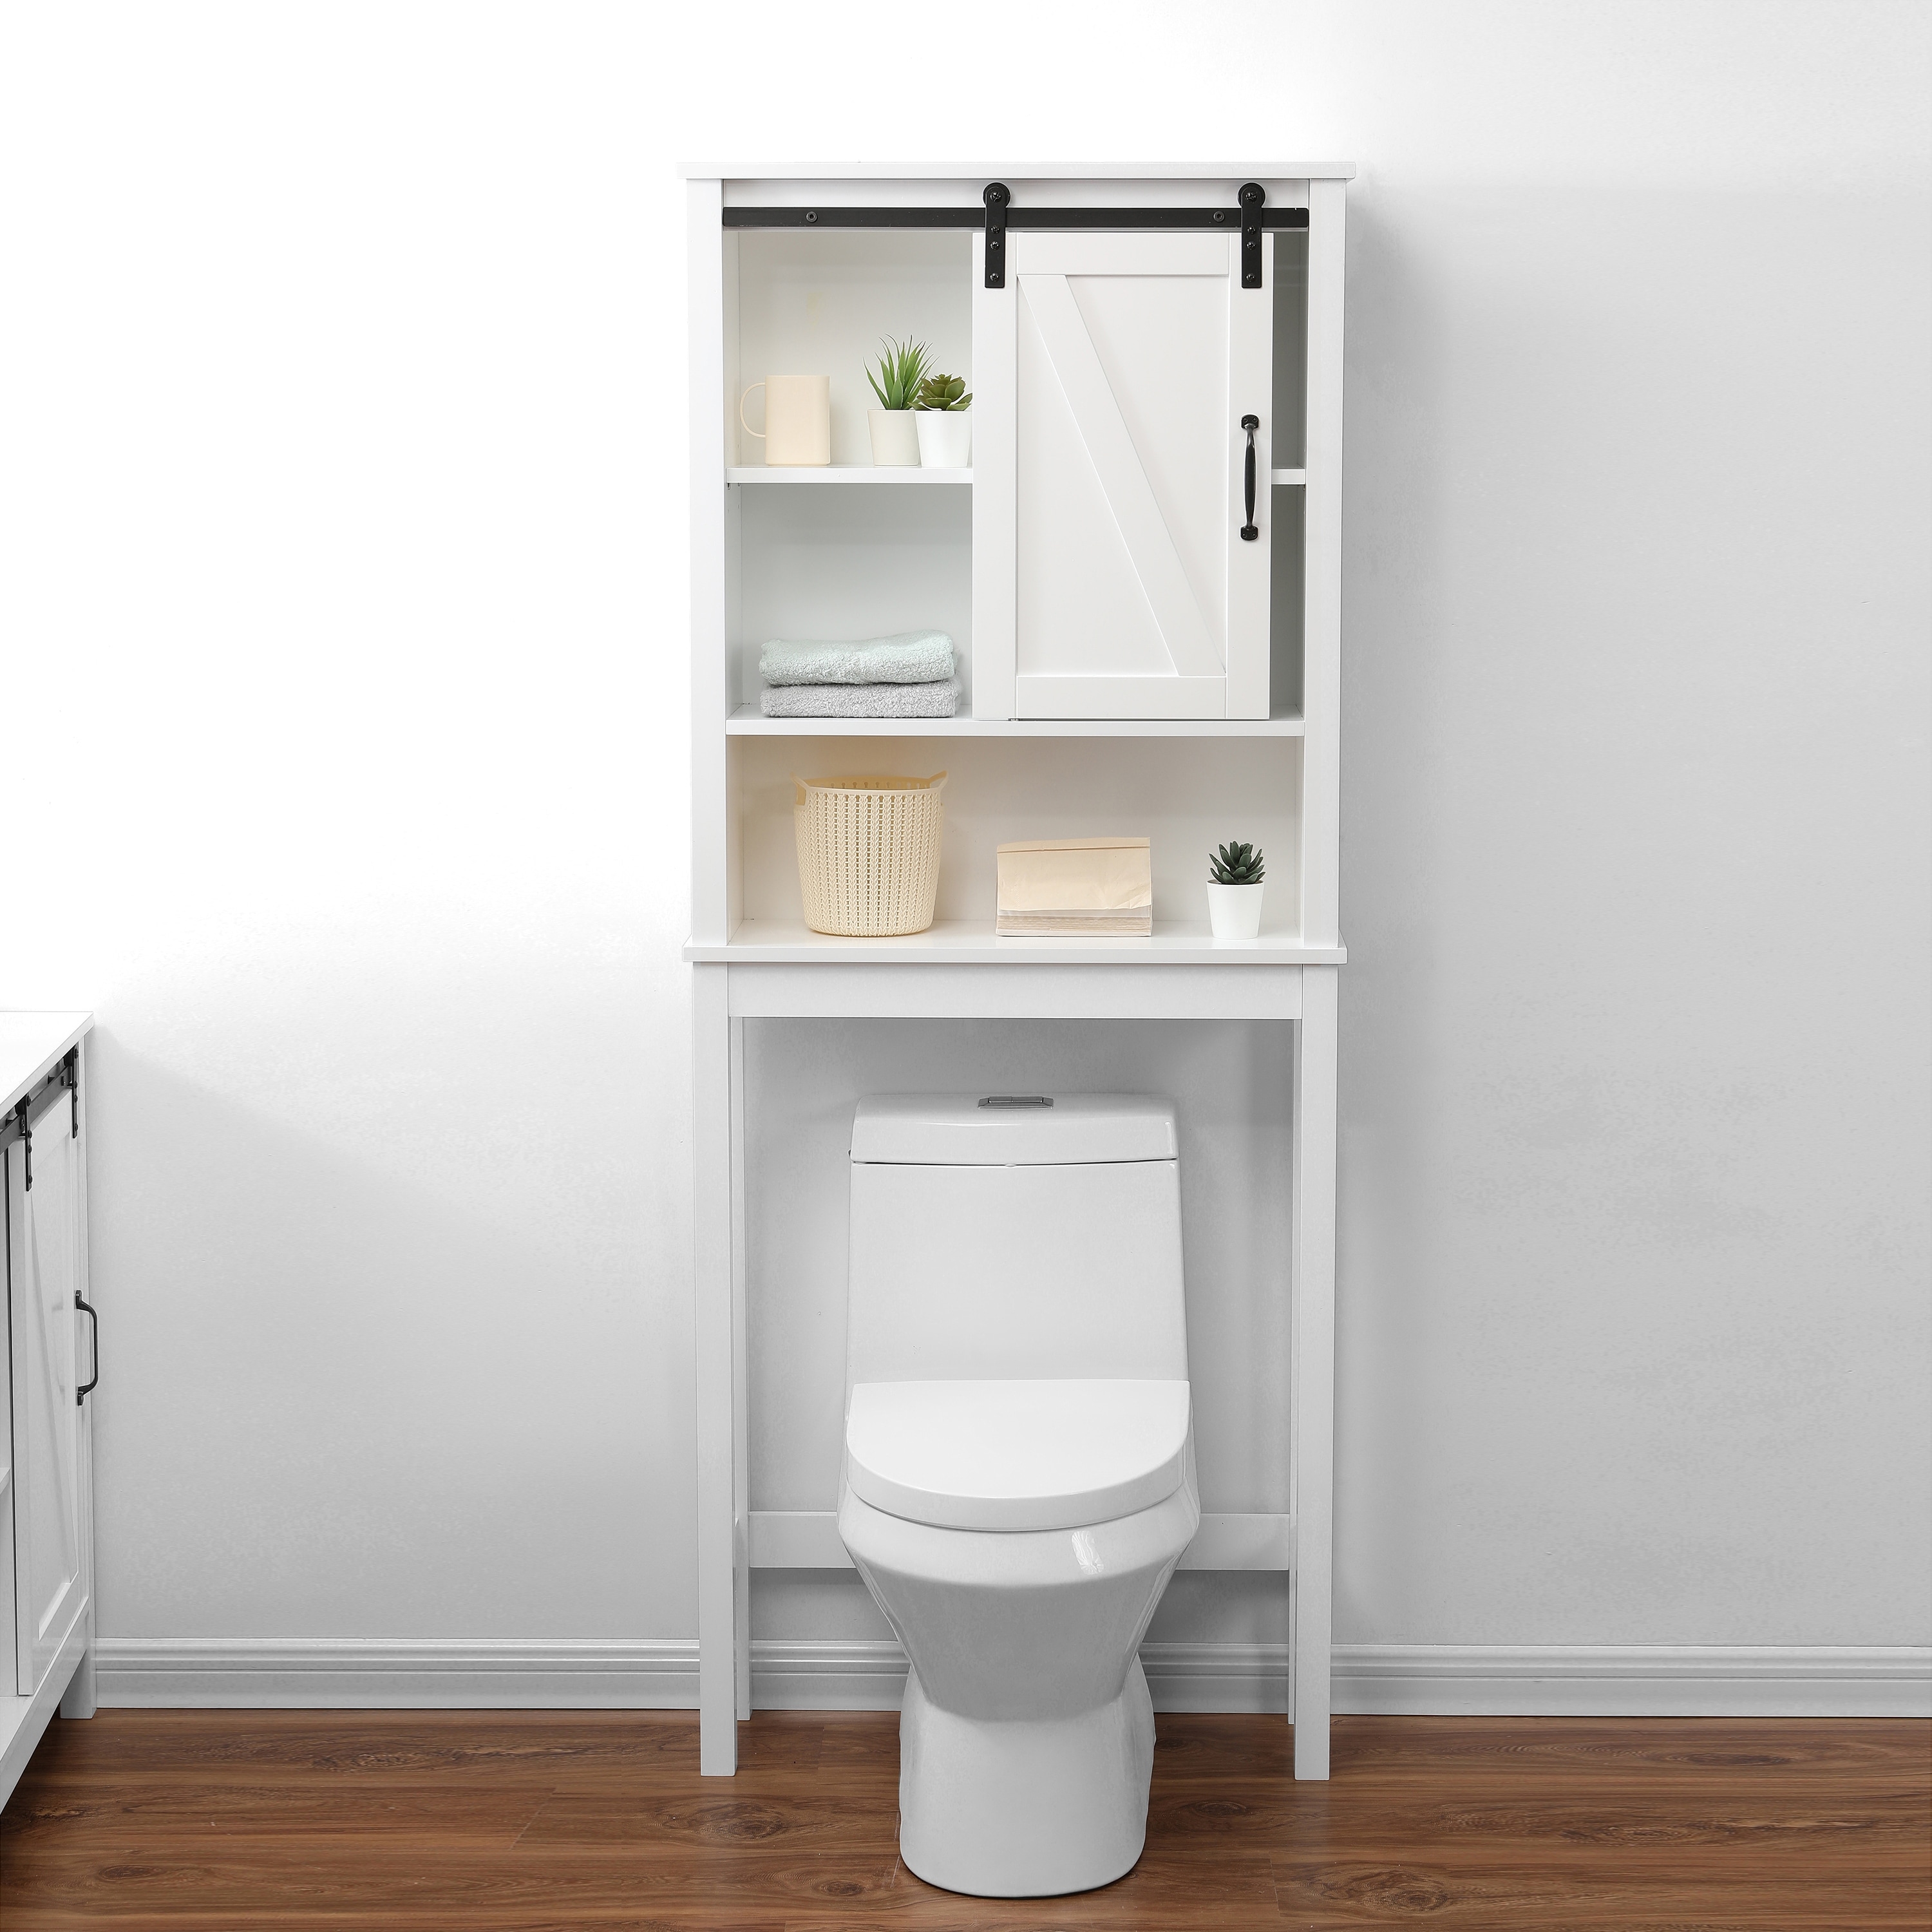 MXARLTR Over The Toilet Storage Cabinet, Over Toilet Bathroom Organizer  with Barn Doors Above Toilet Storage Cabinet Spacesaver Rack Behind Toilet